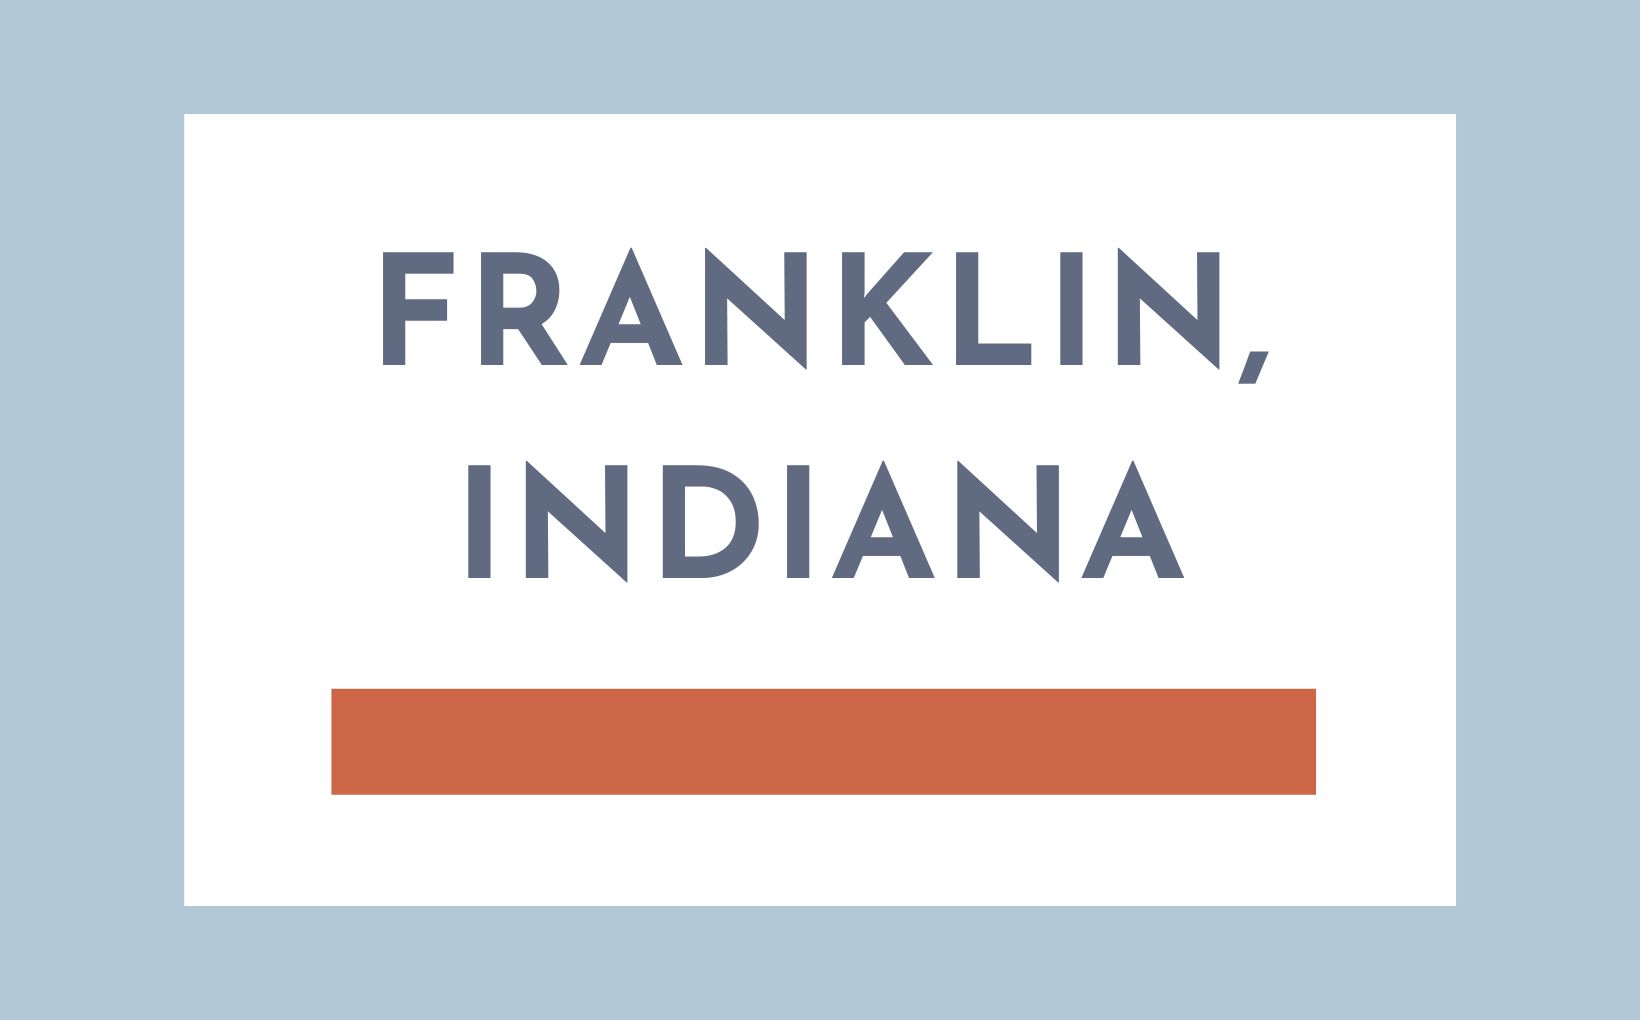 Franklin Indiana feature image